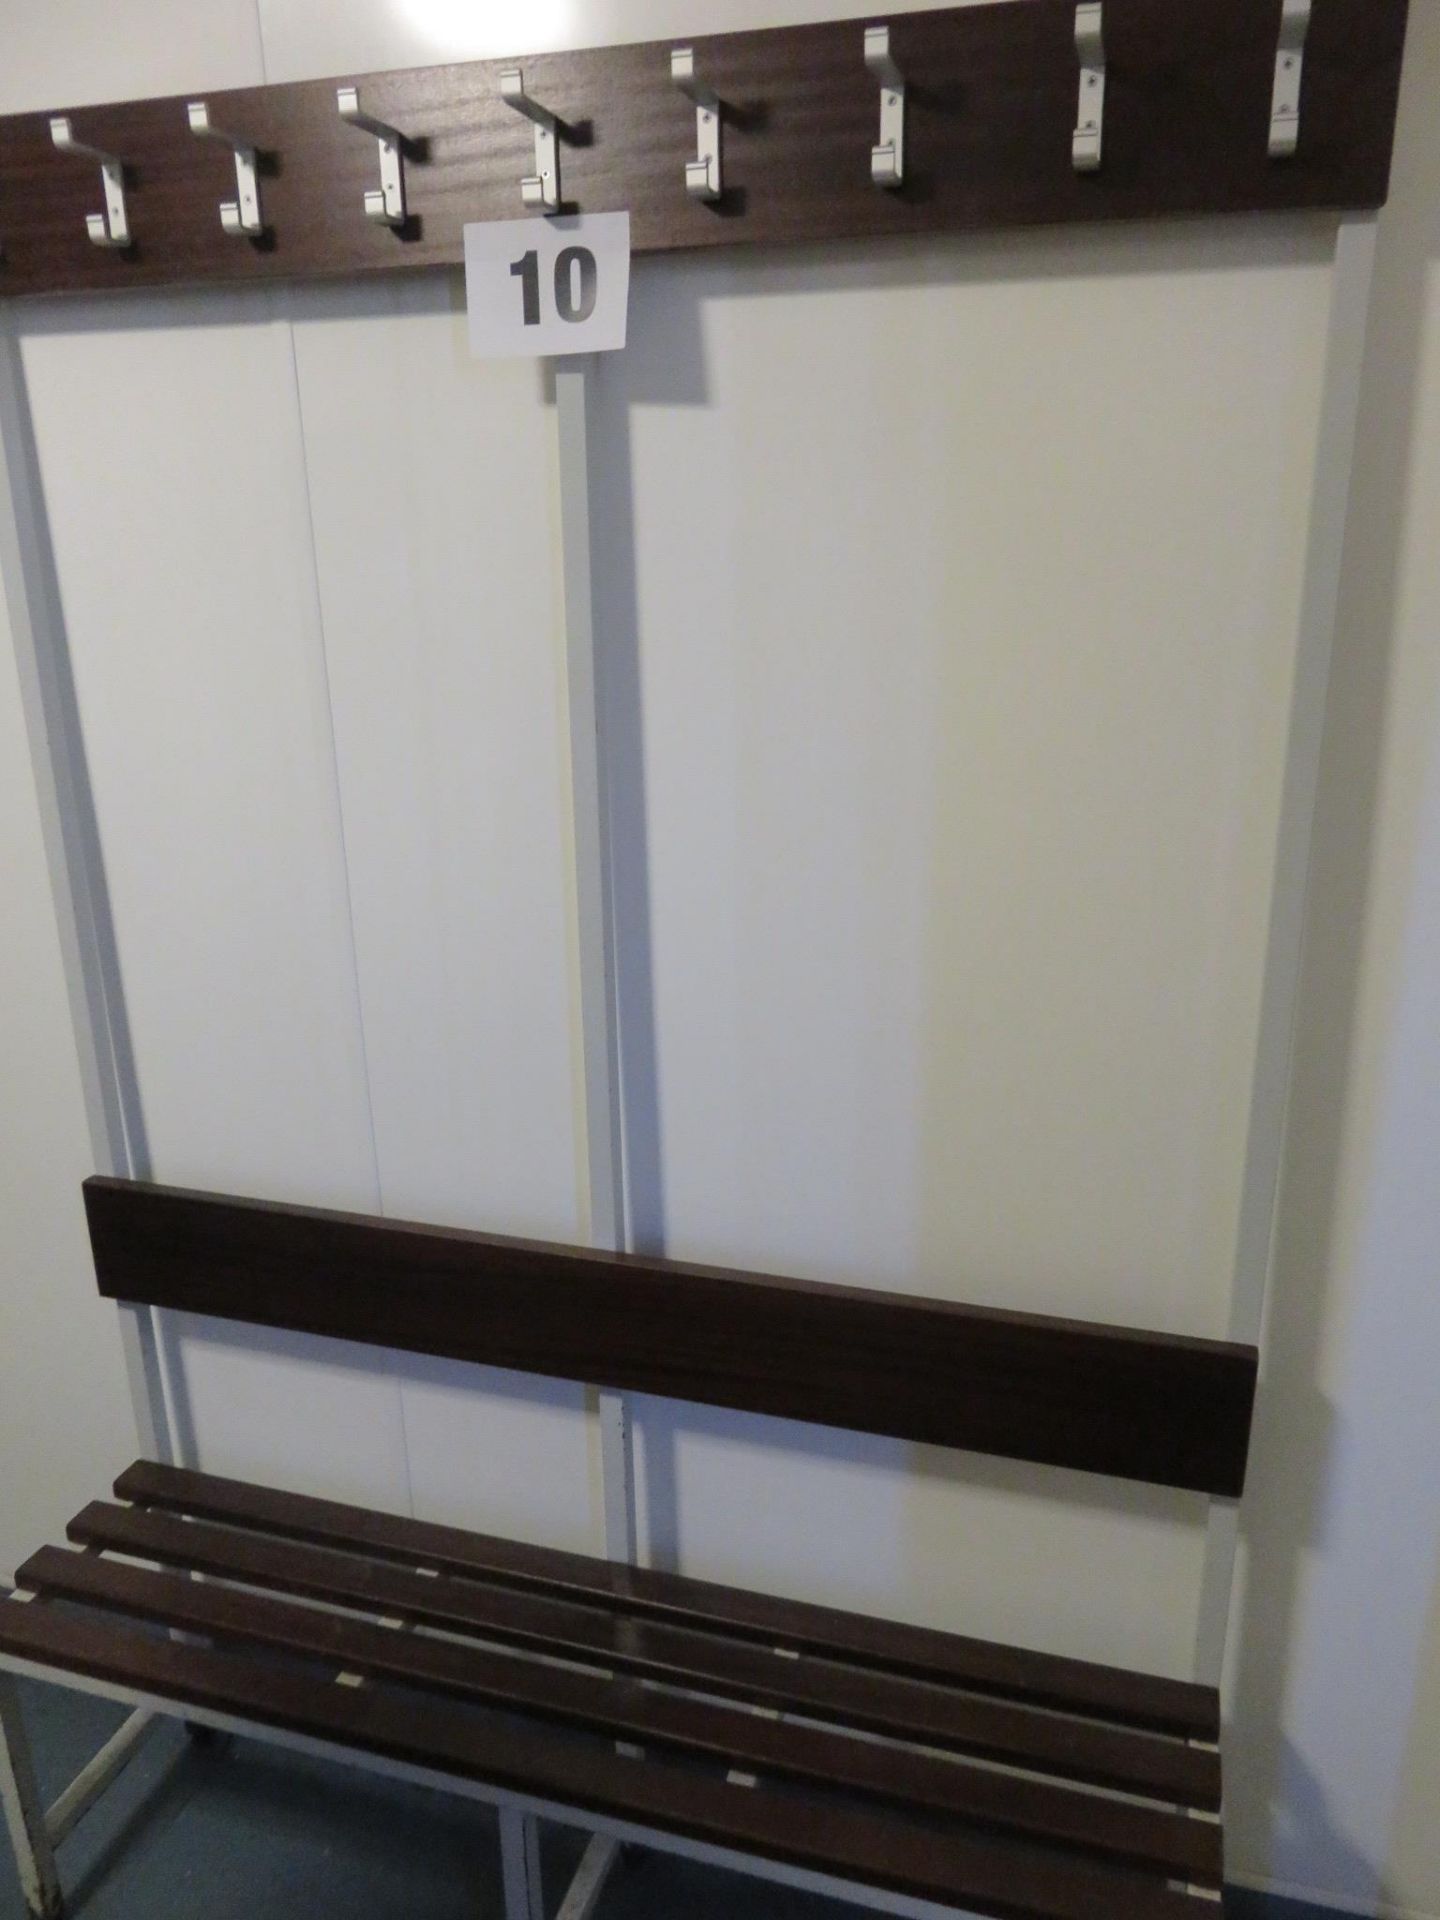 2 x Free standing Bench & Coat Hooks. Aoprox. 1200 x 1800mm high. Lift out £10